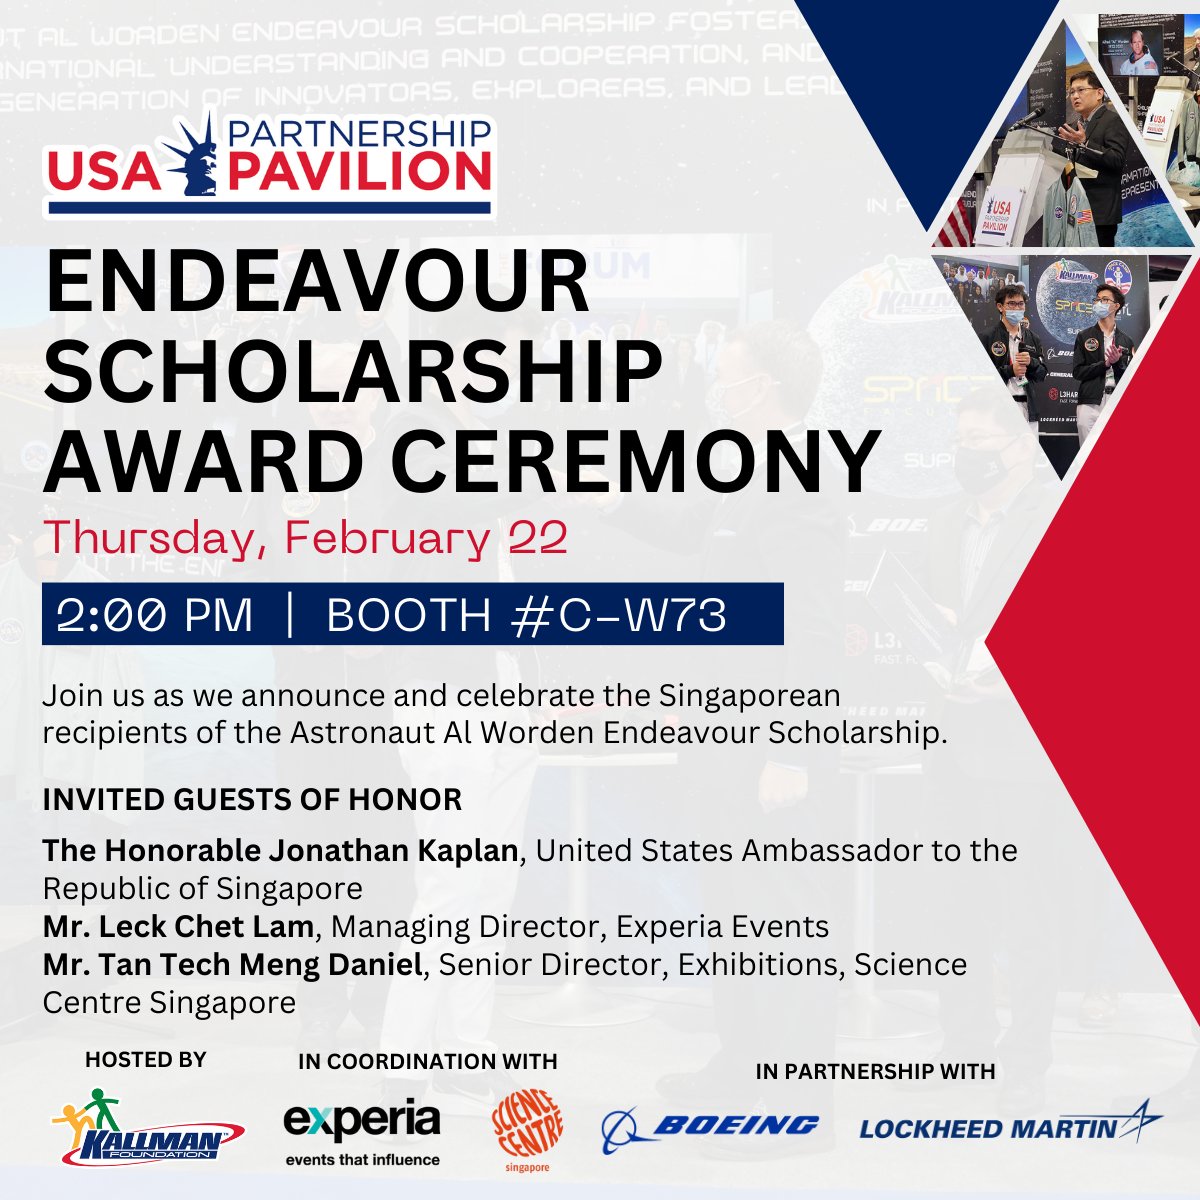 Join us as we announce and celebrate the Singaporean recipients of the Astronaut Al Worden Endeavour Scholarship. This year’s winners are “Mission Team #18, Singapore” and will attend U.S. Space and Rocket Center’s Space Camp in July 2024. All events: kallman.com/event/singapor…